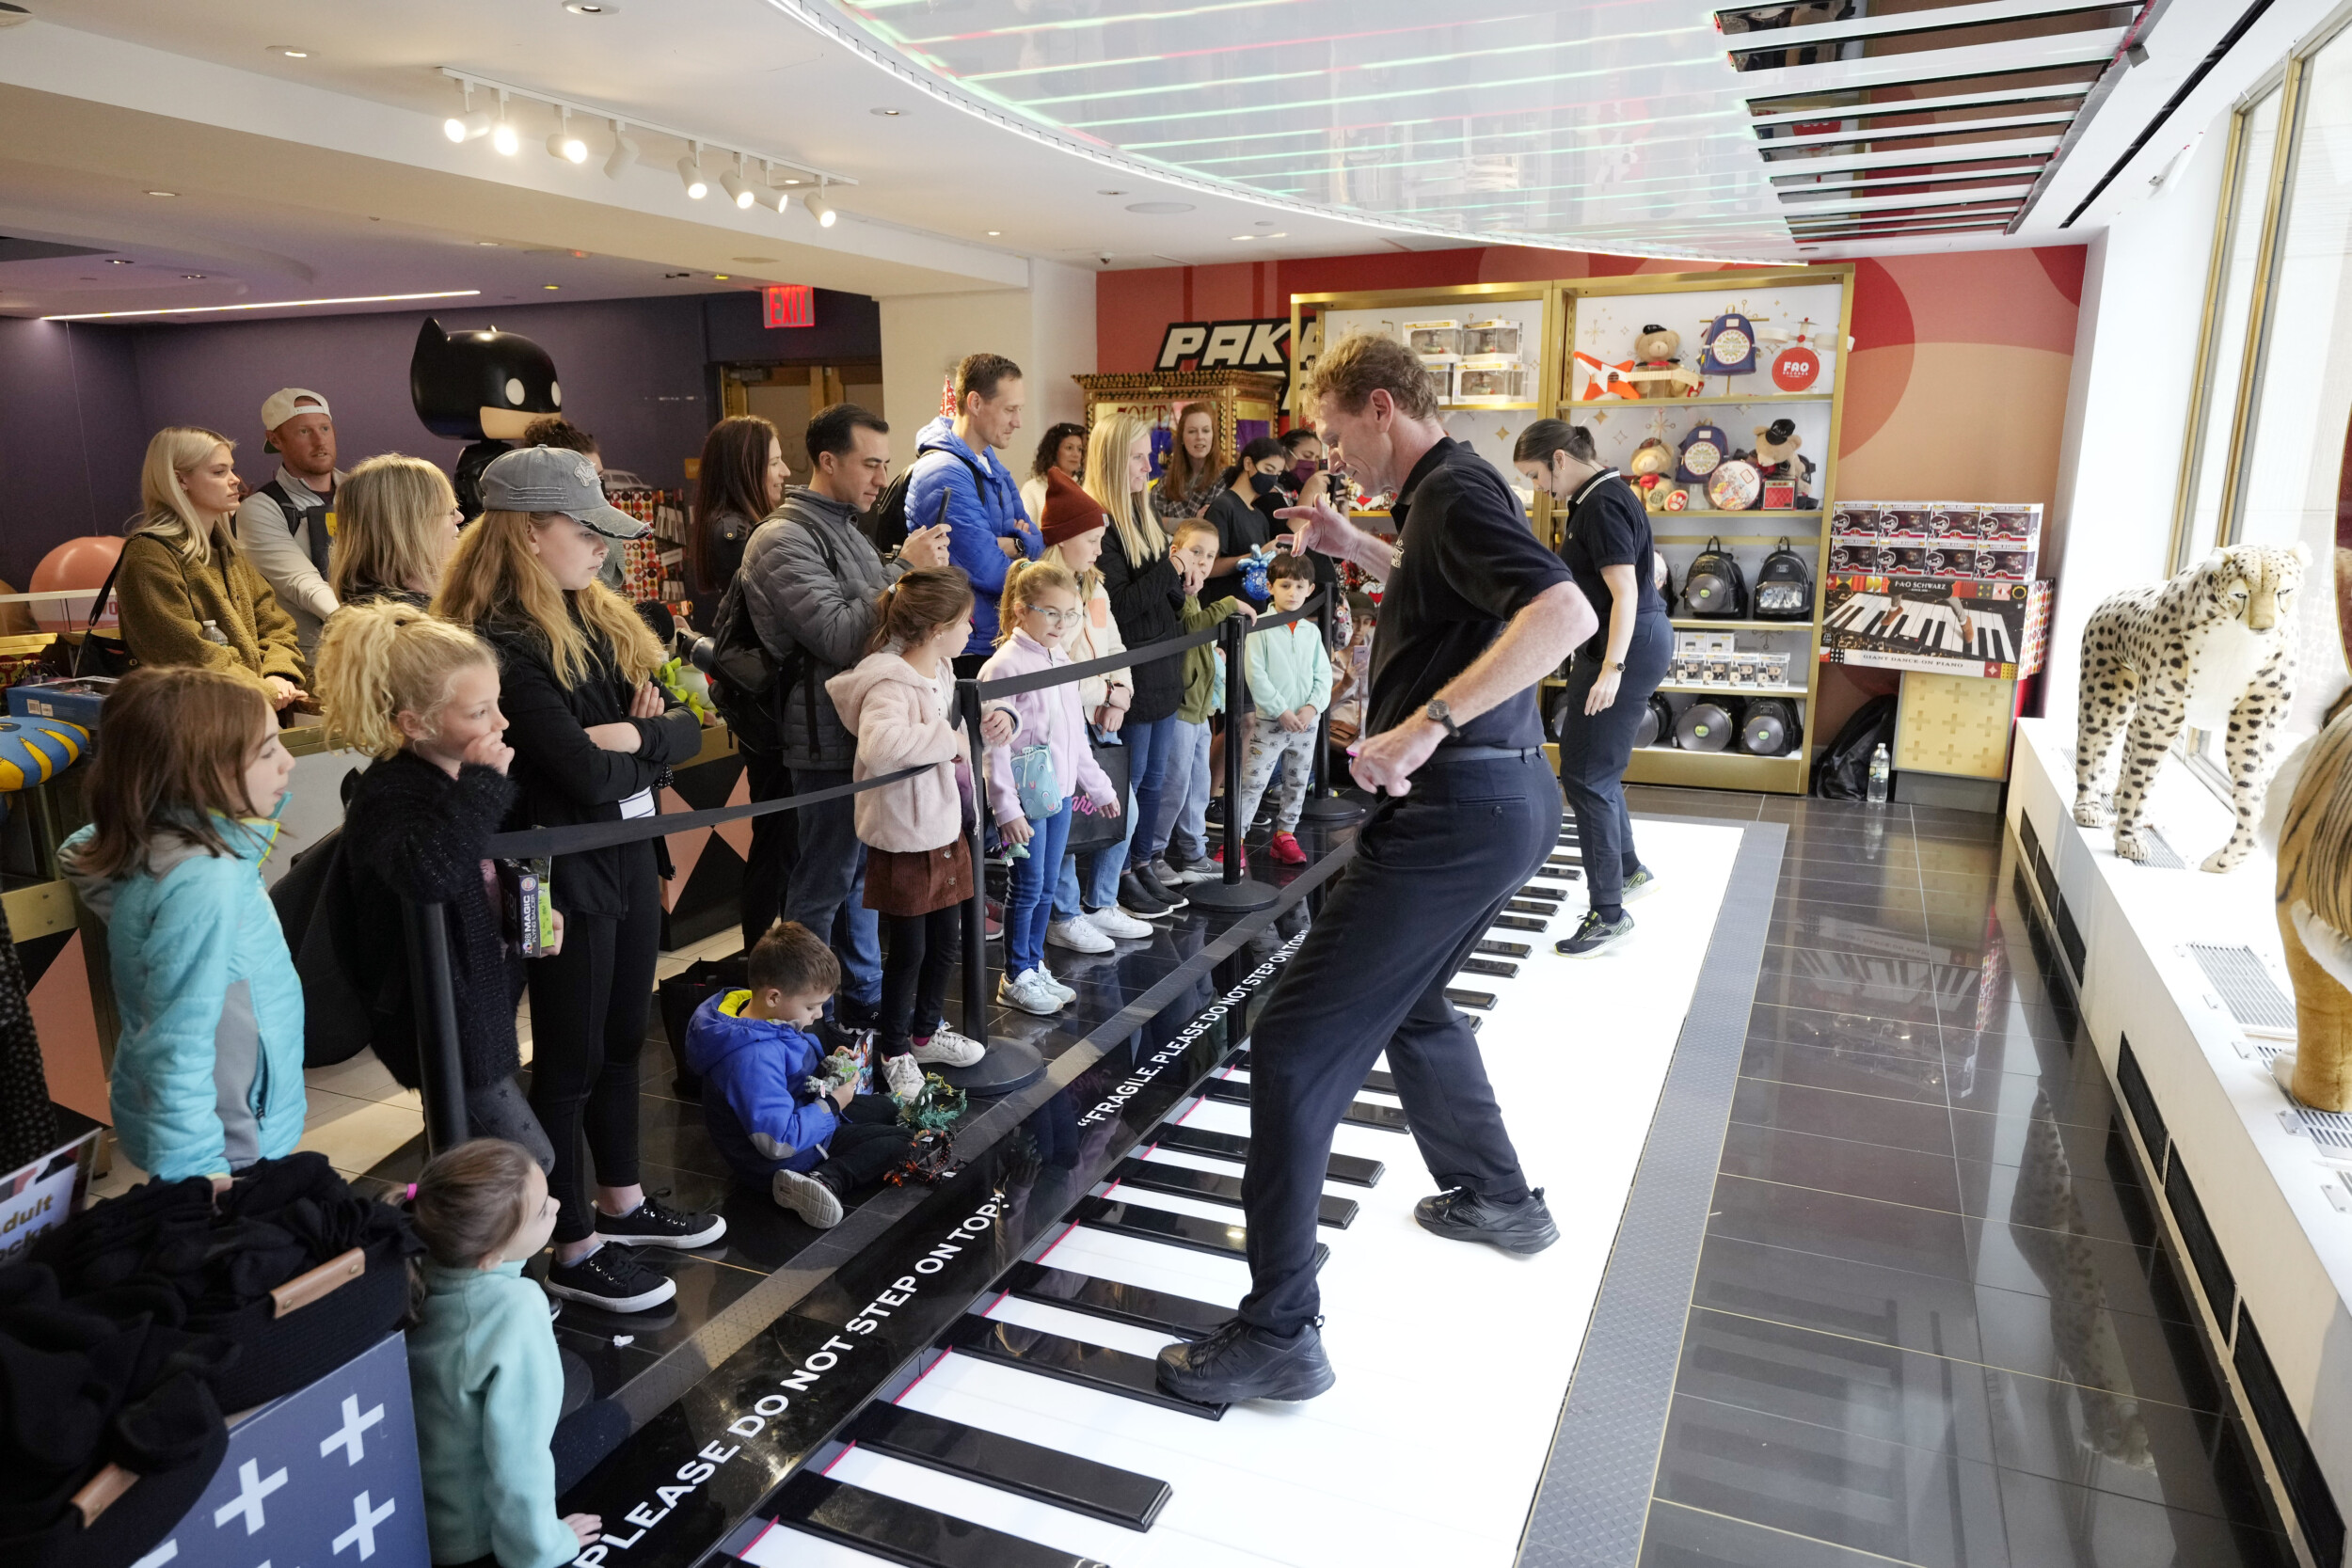 FAO Schwarz marks 160 years with party at Rockefeller CenterToy